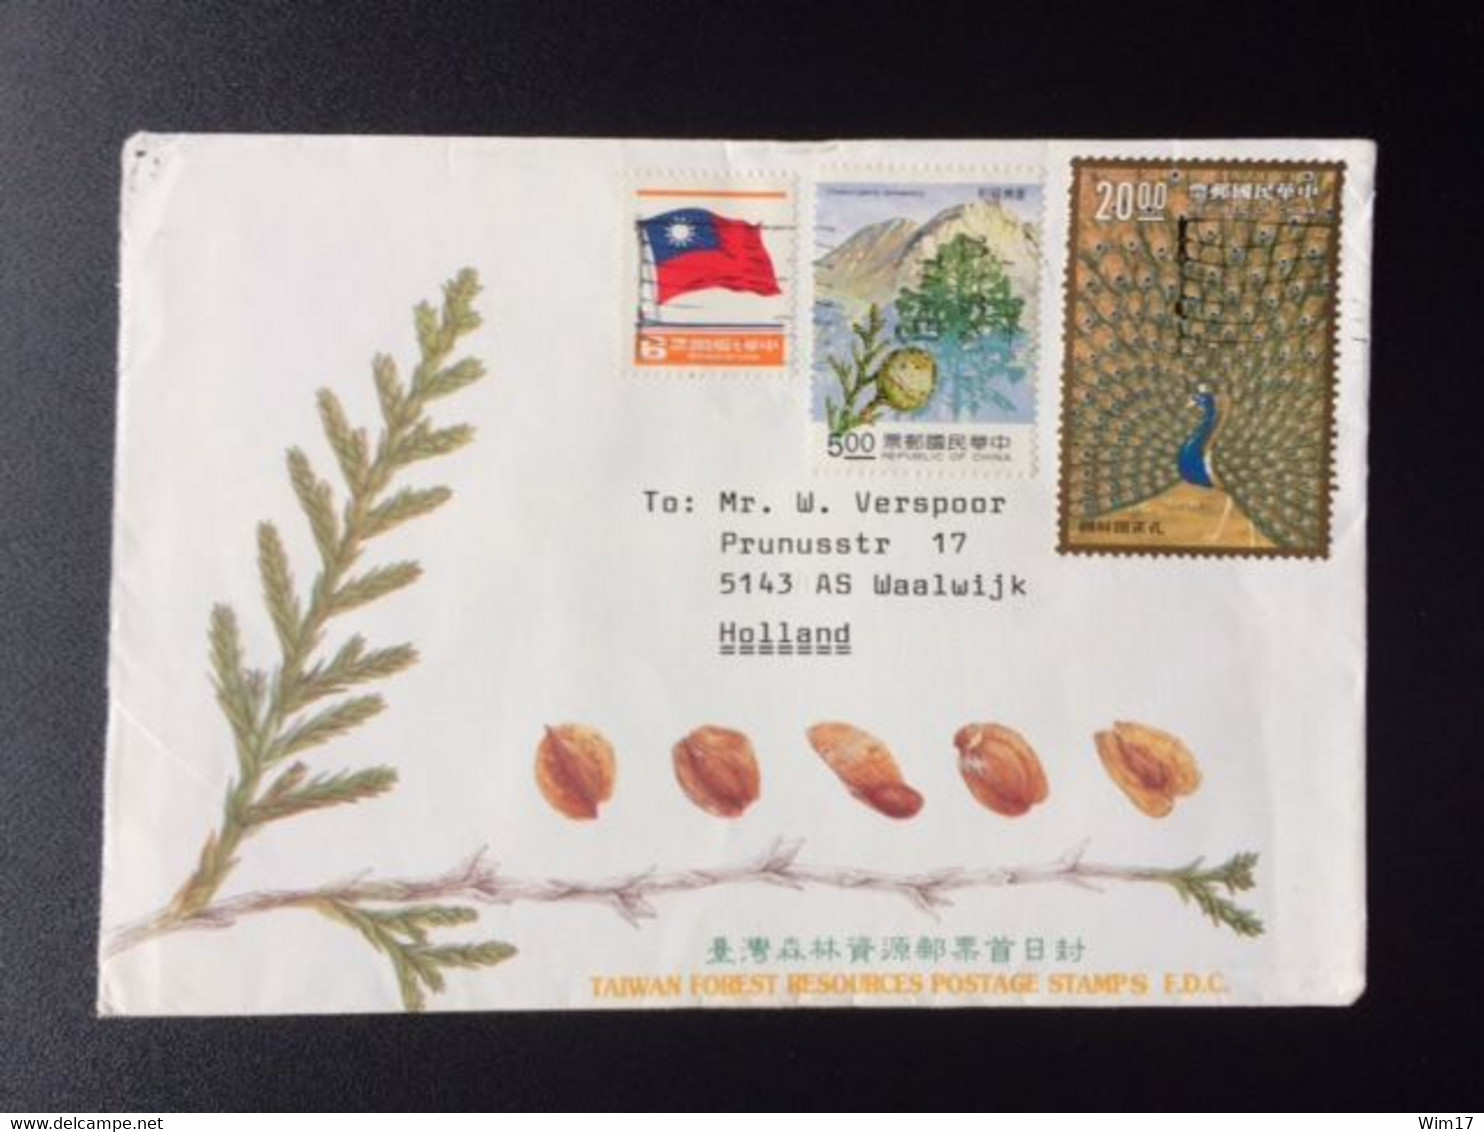 TAIWAN 1992 AIR MAIL LETTER PEACOCK - Entiers Postaux